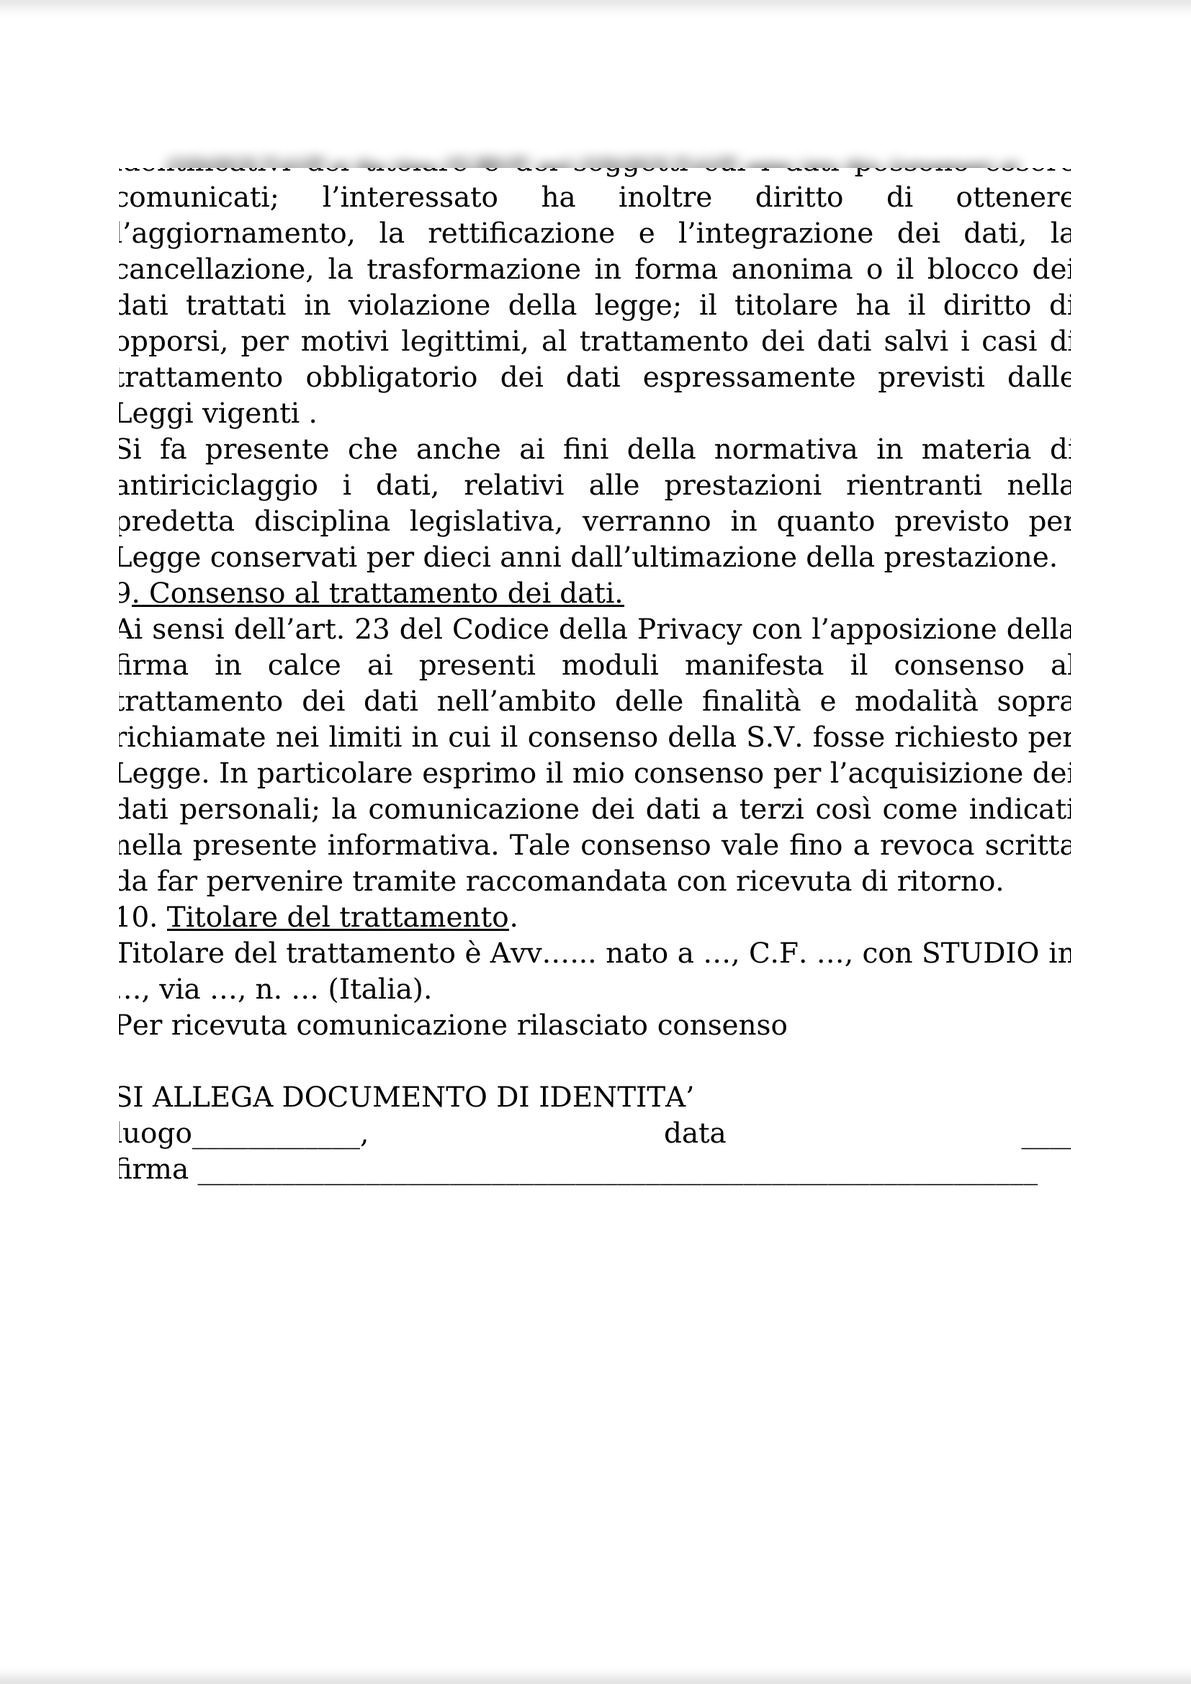 INTELLECTUAL WORK AGREEMENT FOR OUT-OF-COURT ACTIVITIES AND ATTACHMENTS 1 (PRIVACY); 2 (ANTI-MONEY LAUNDERING); AND 3 FEE QUOTE / CONTRATTO D’OPERA INTELLETTUALE STRAGIUDIZIALE-8